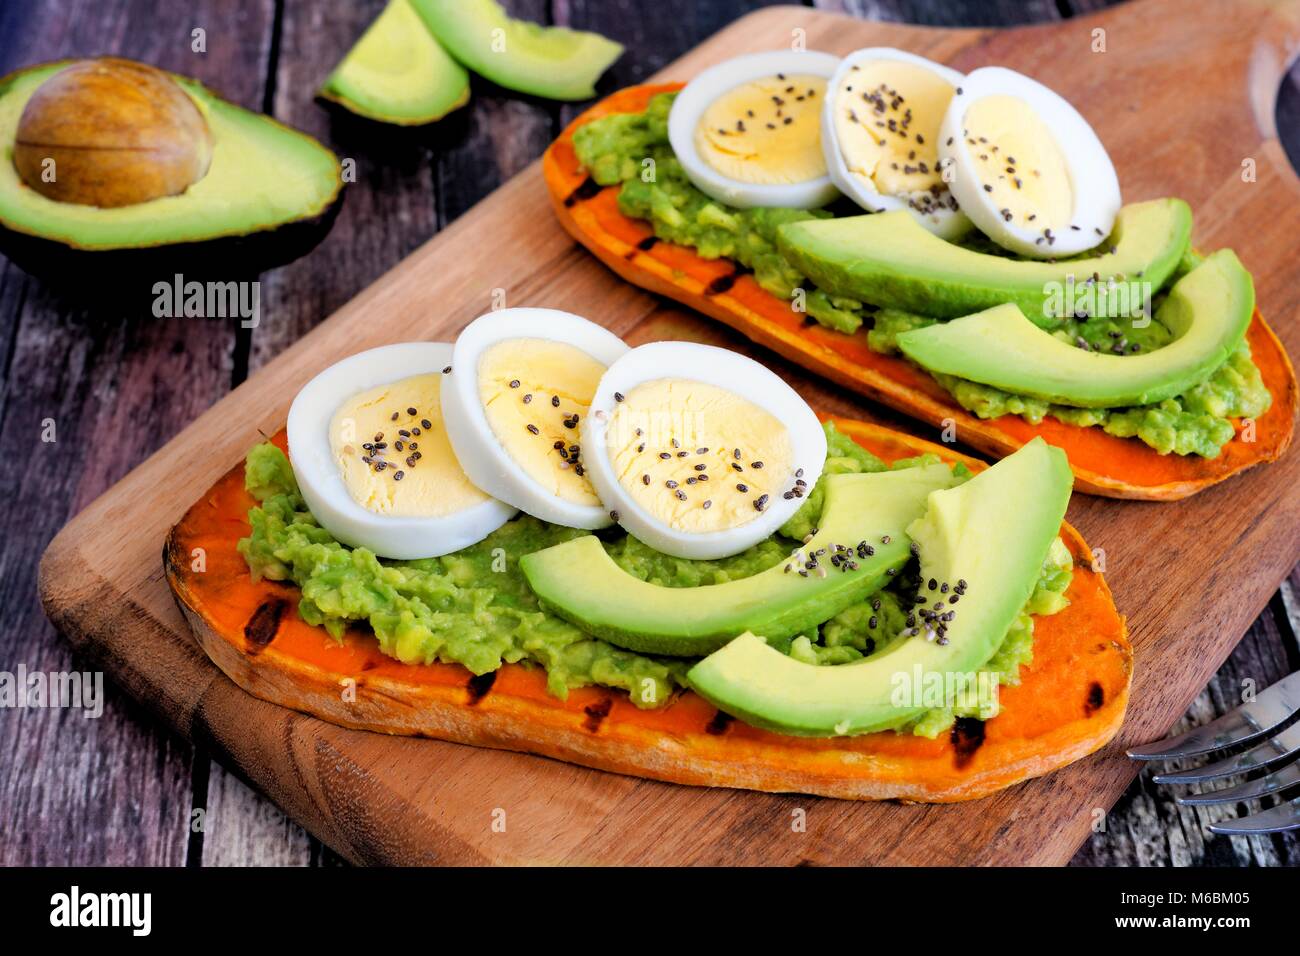 Sweet potato toasts with avocado, eggs and chia seeds on a wood board. Table scene with a wooden background. Stock Photo